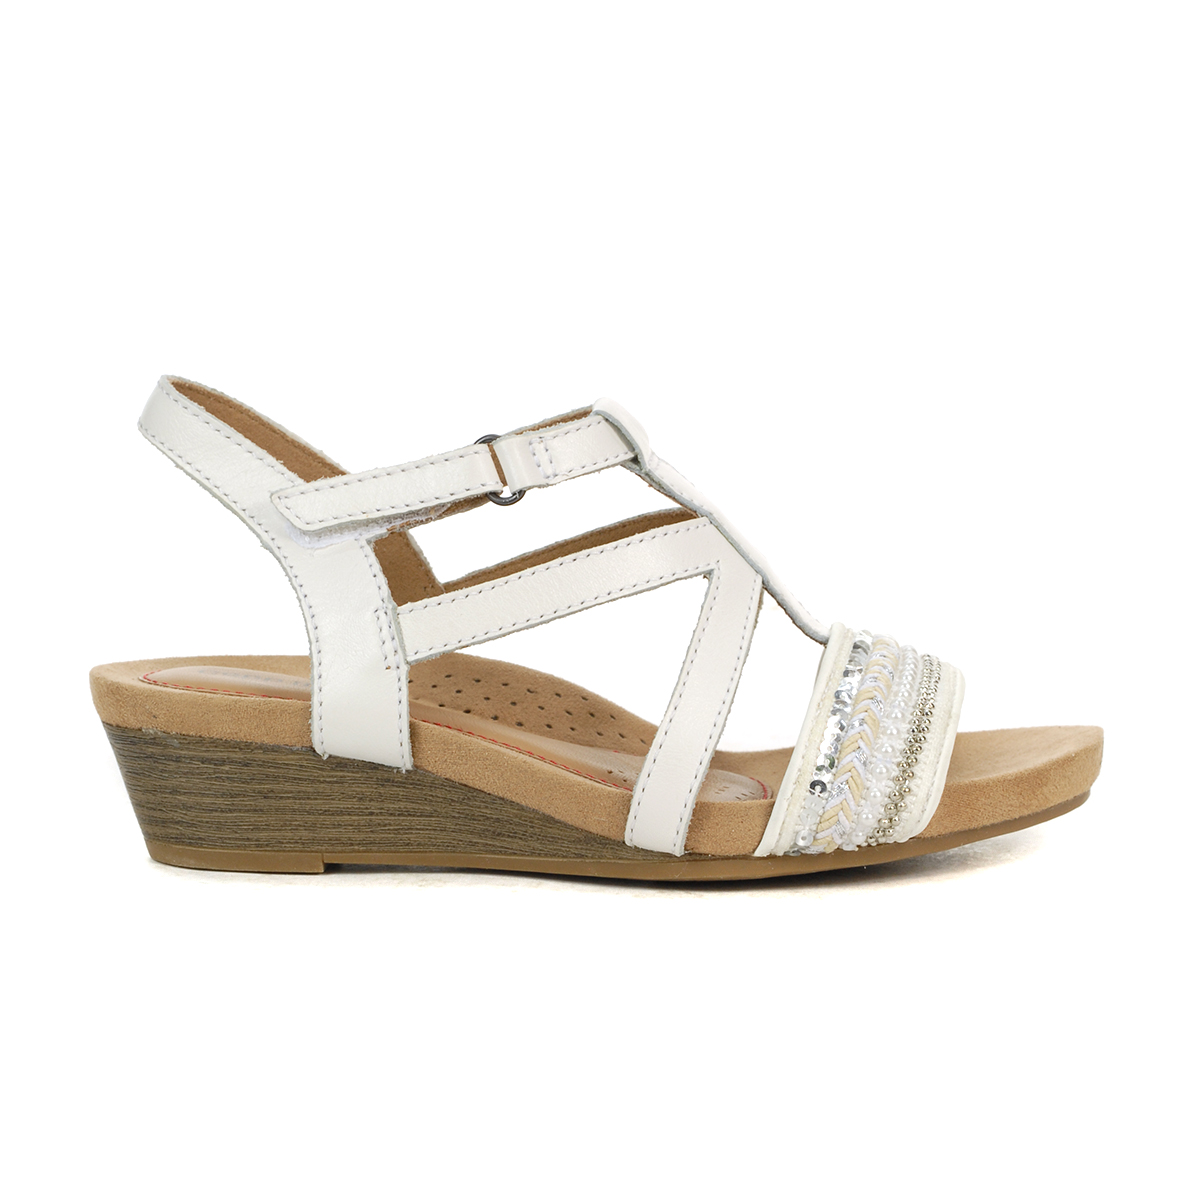 Rockport Cobb Hill Women's Hollywood Sling White Sandals